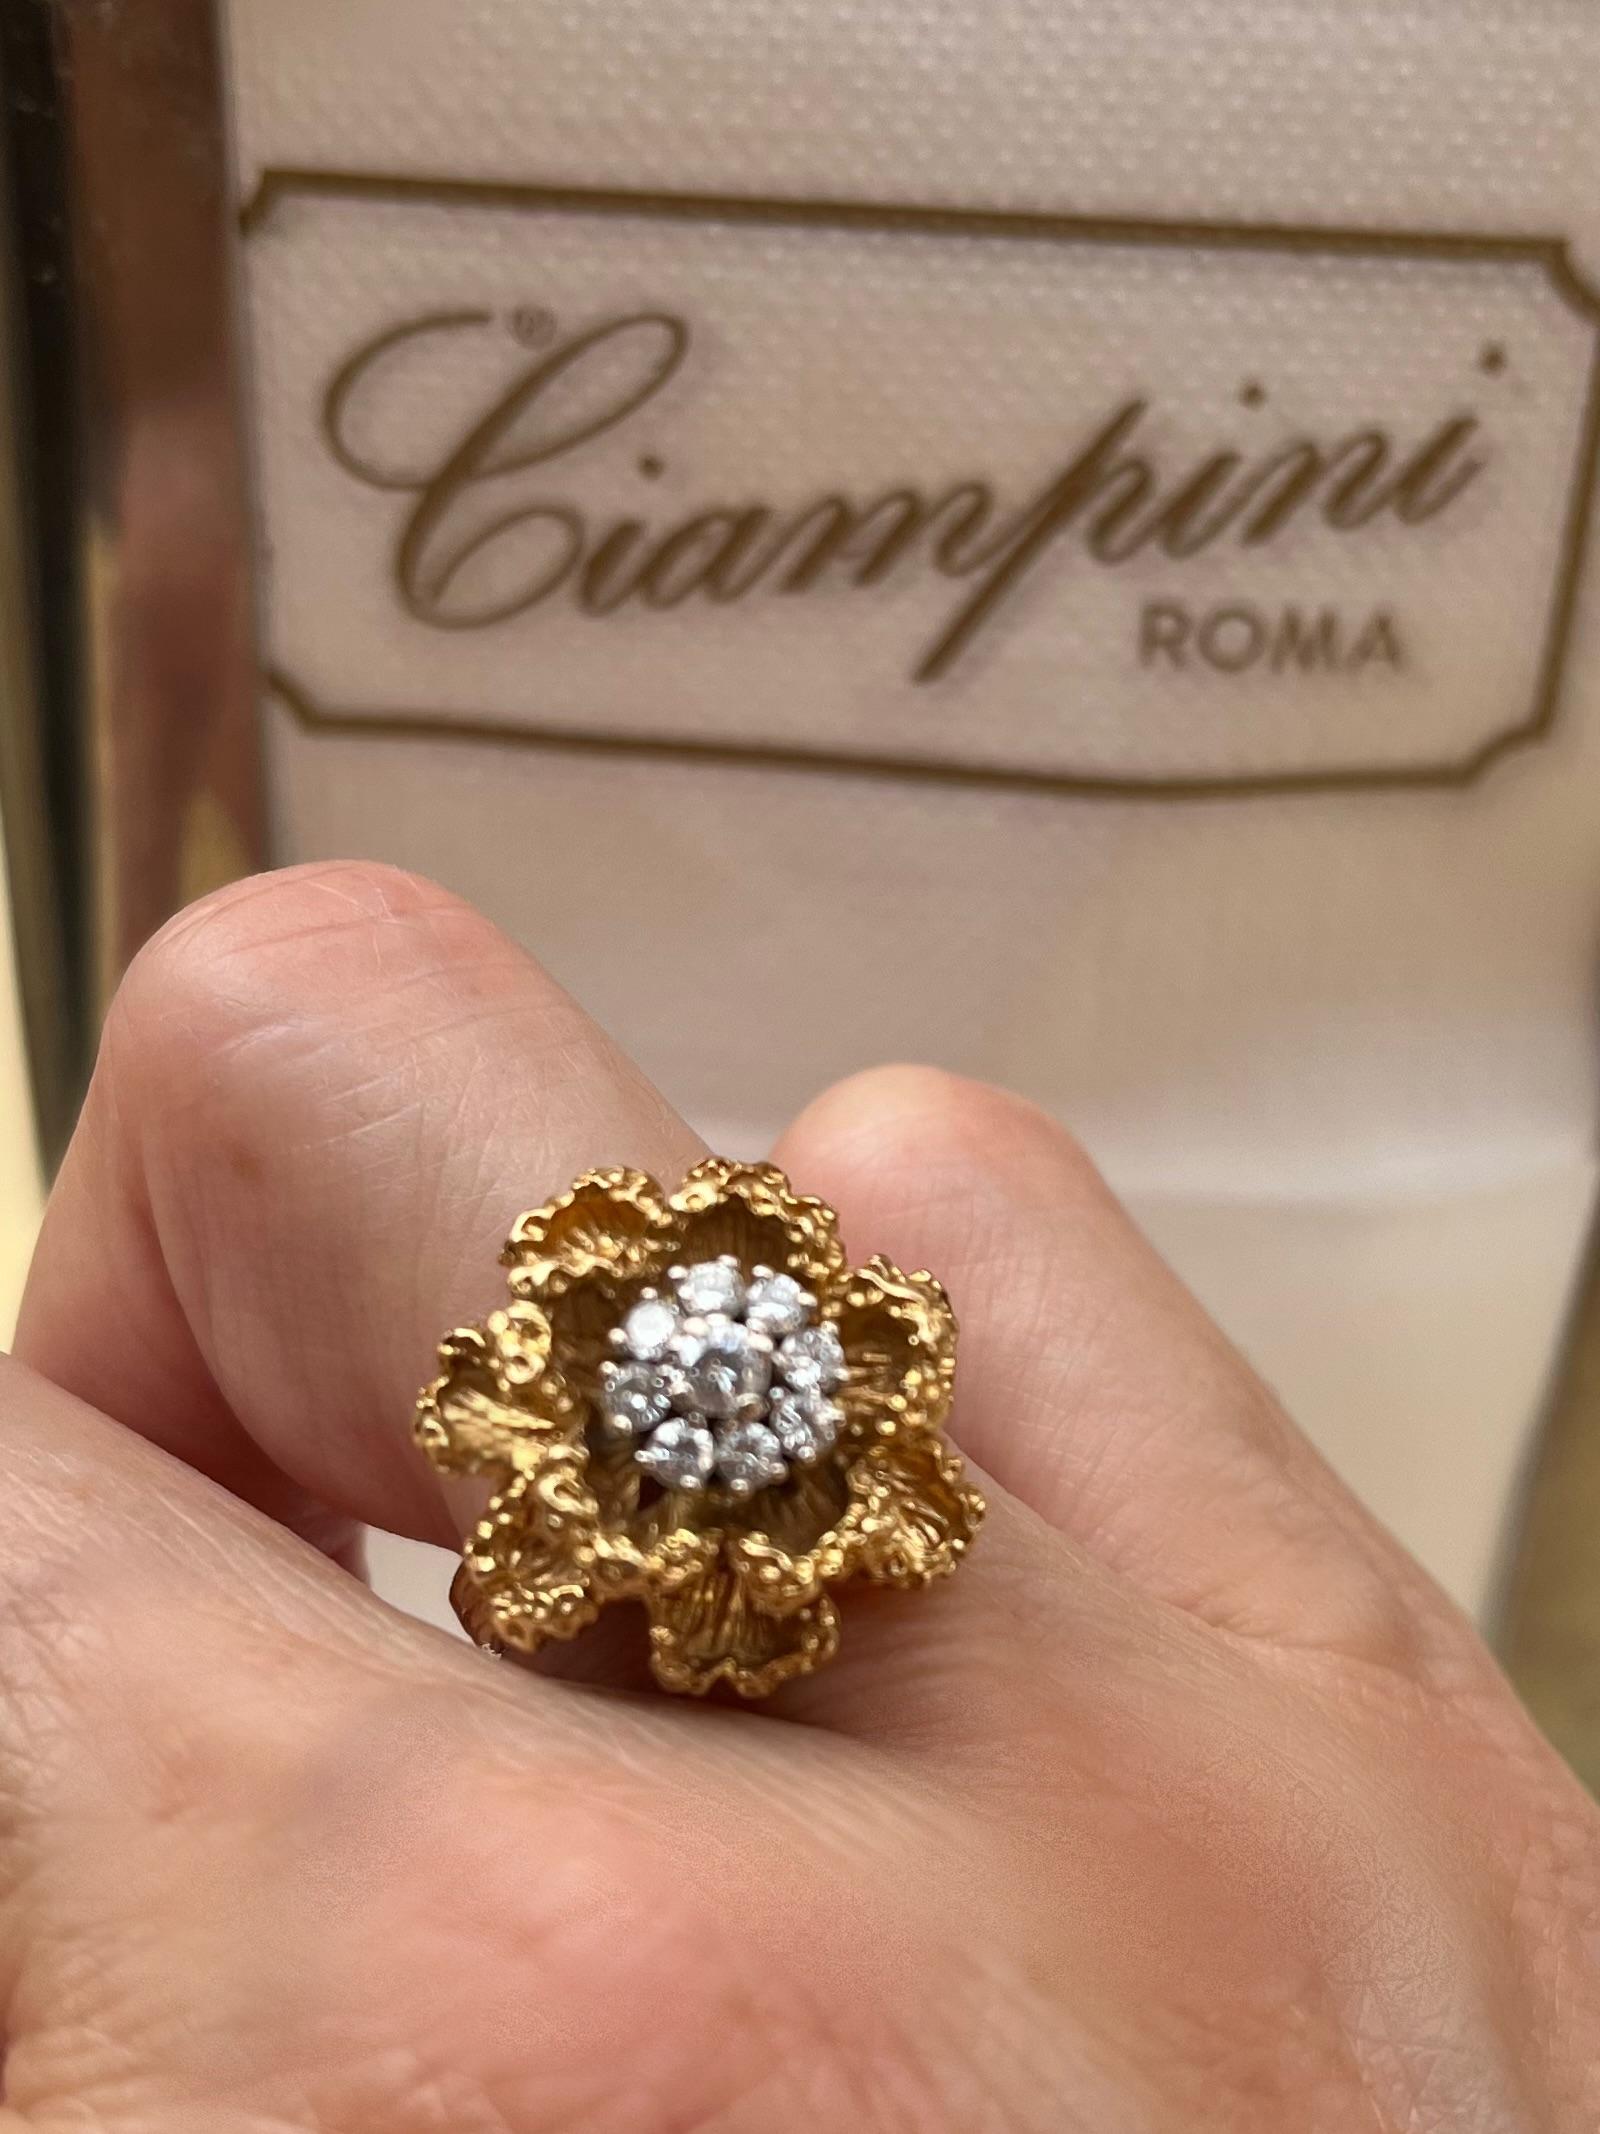 Romantic Diamond Ring ornamented with a diamond flower. Made in 1970